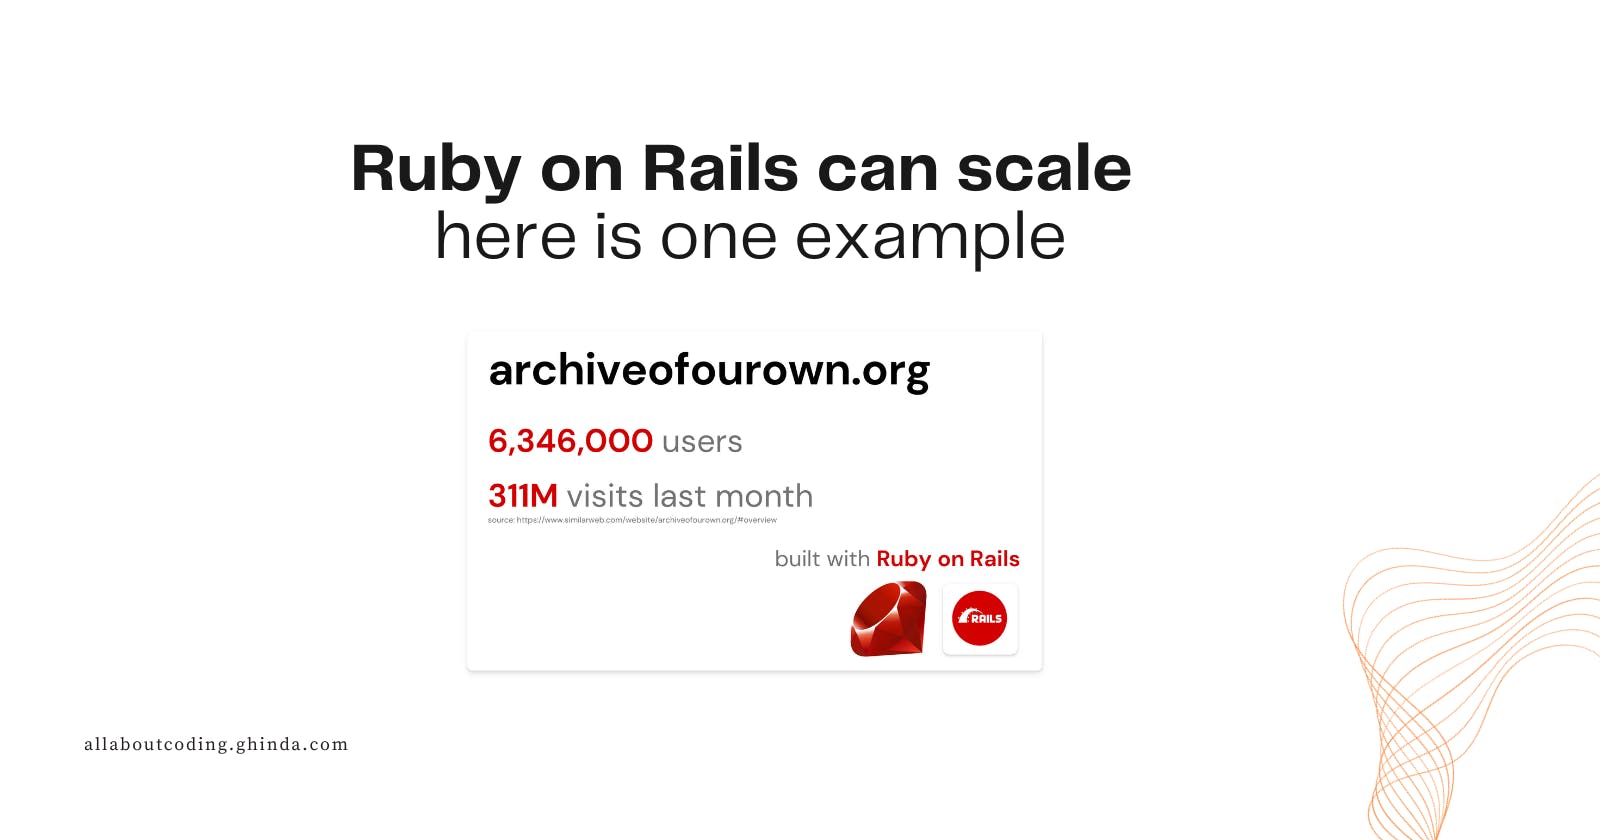 Ruby on Rails can scale - here is one example